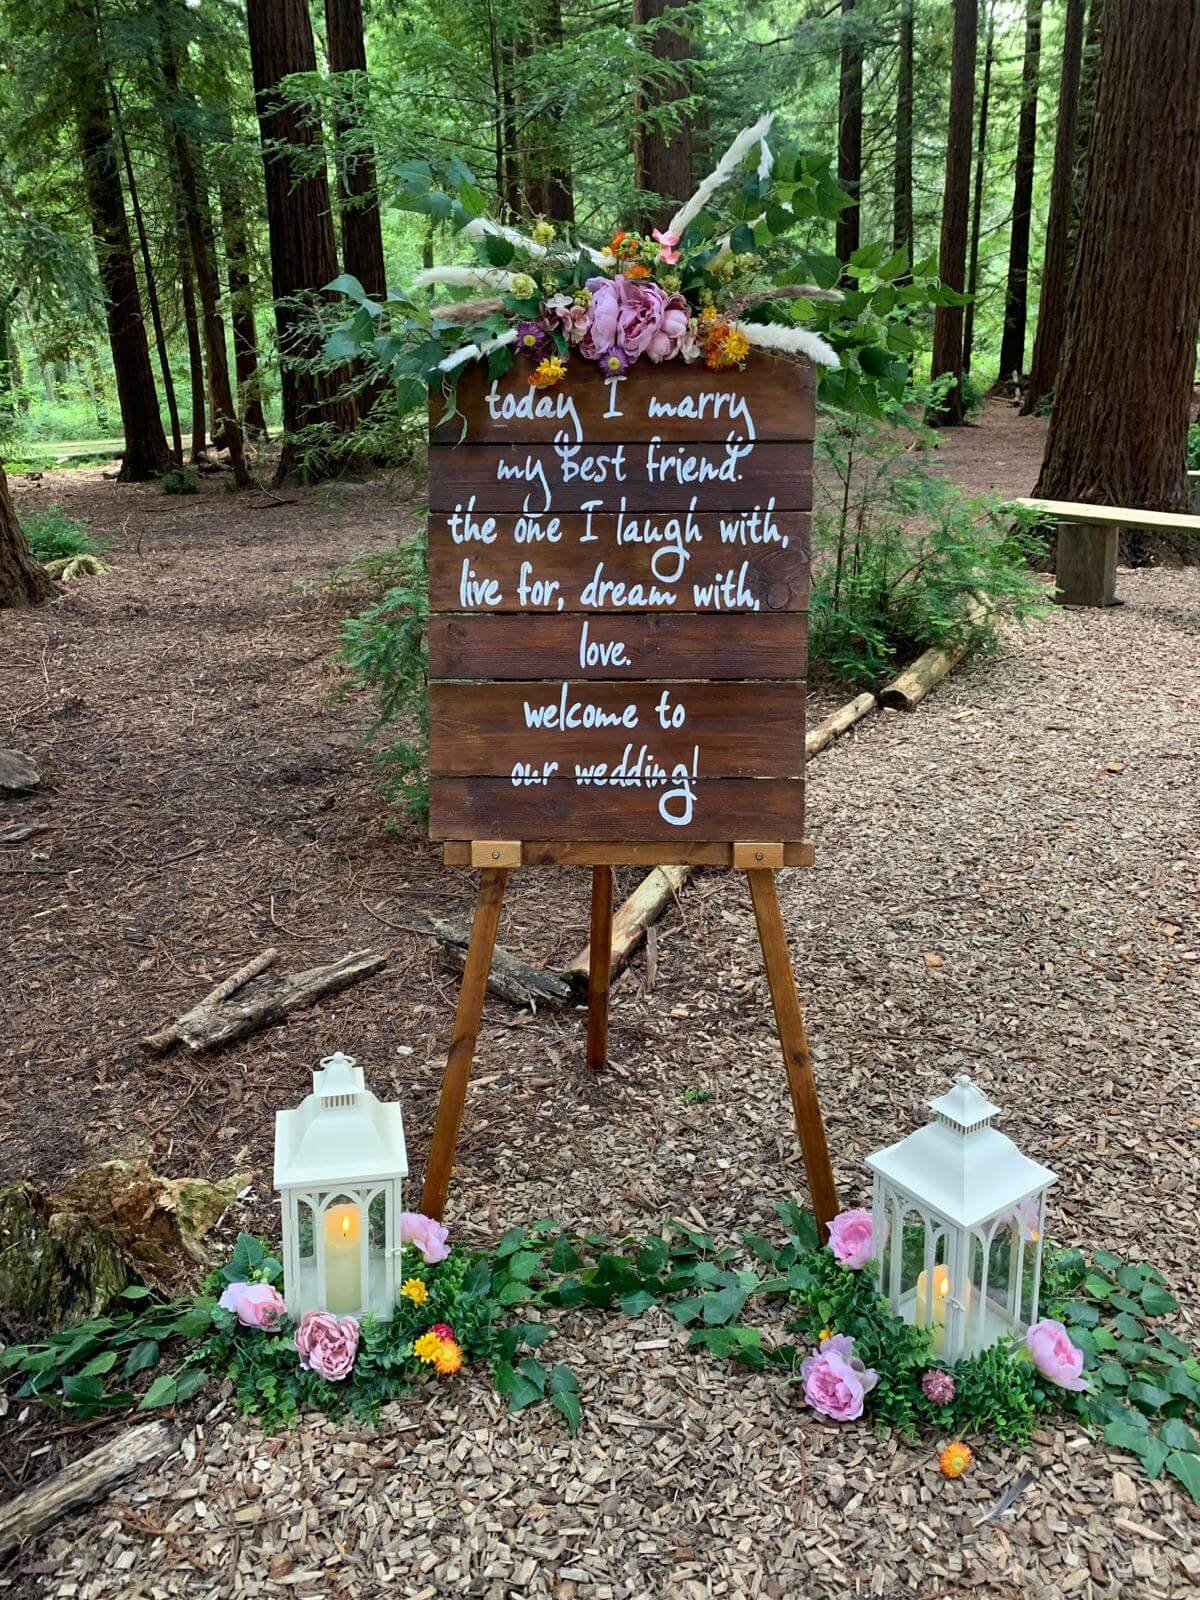 Today_I_marry_welcome_wedding_sign_twowoods.jpg